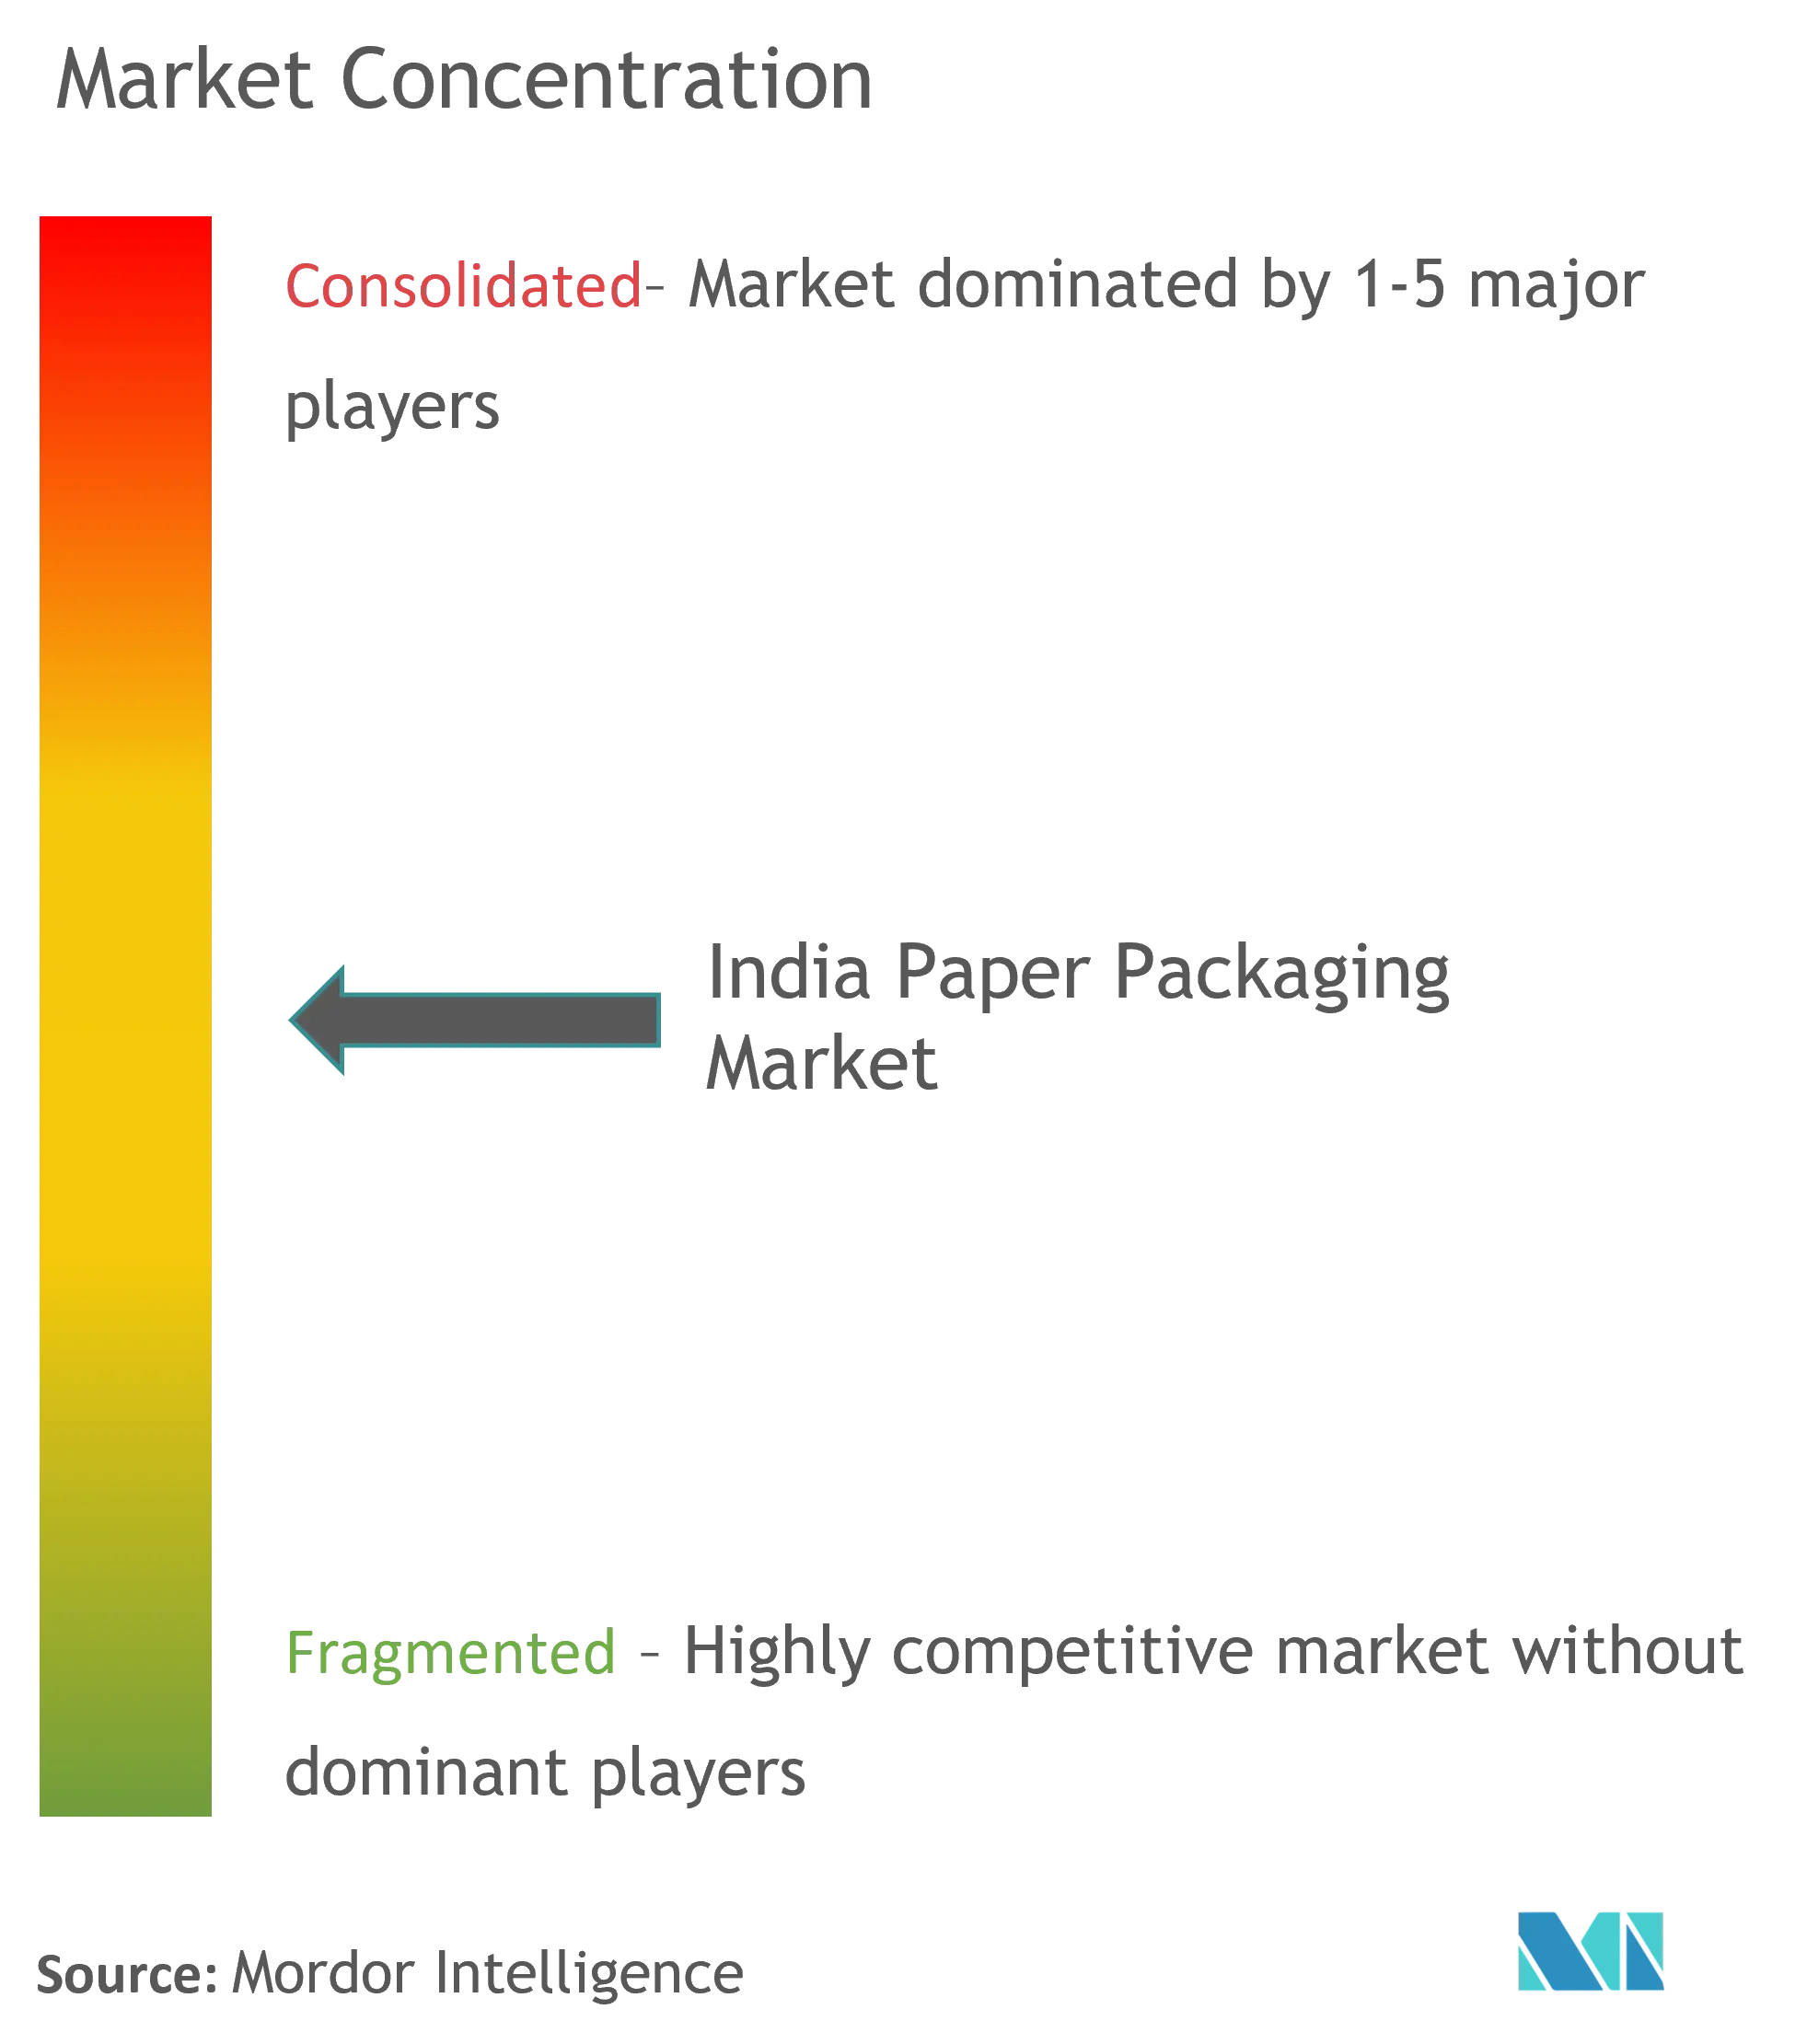 India Paper Packaging Market